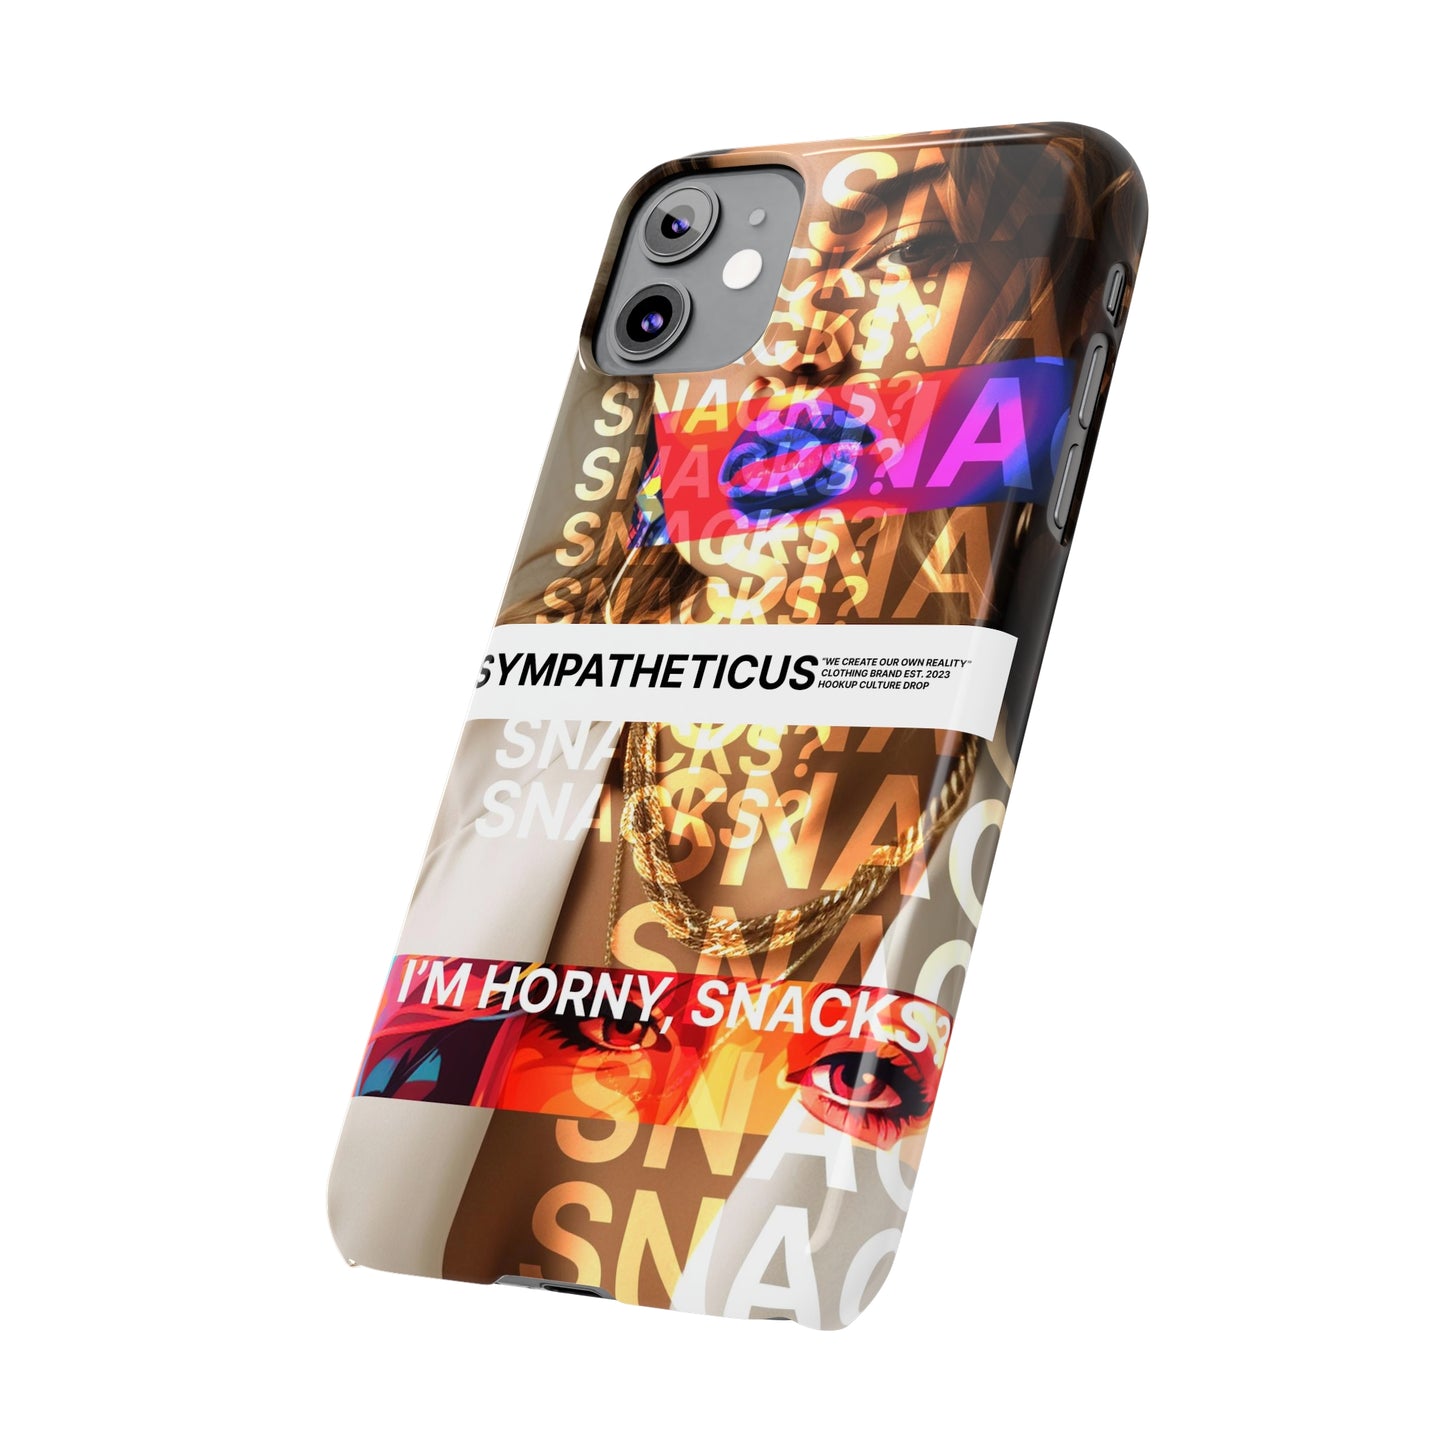 Hookup culture special iphone case-15